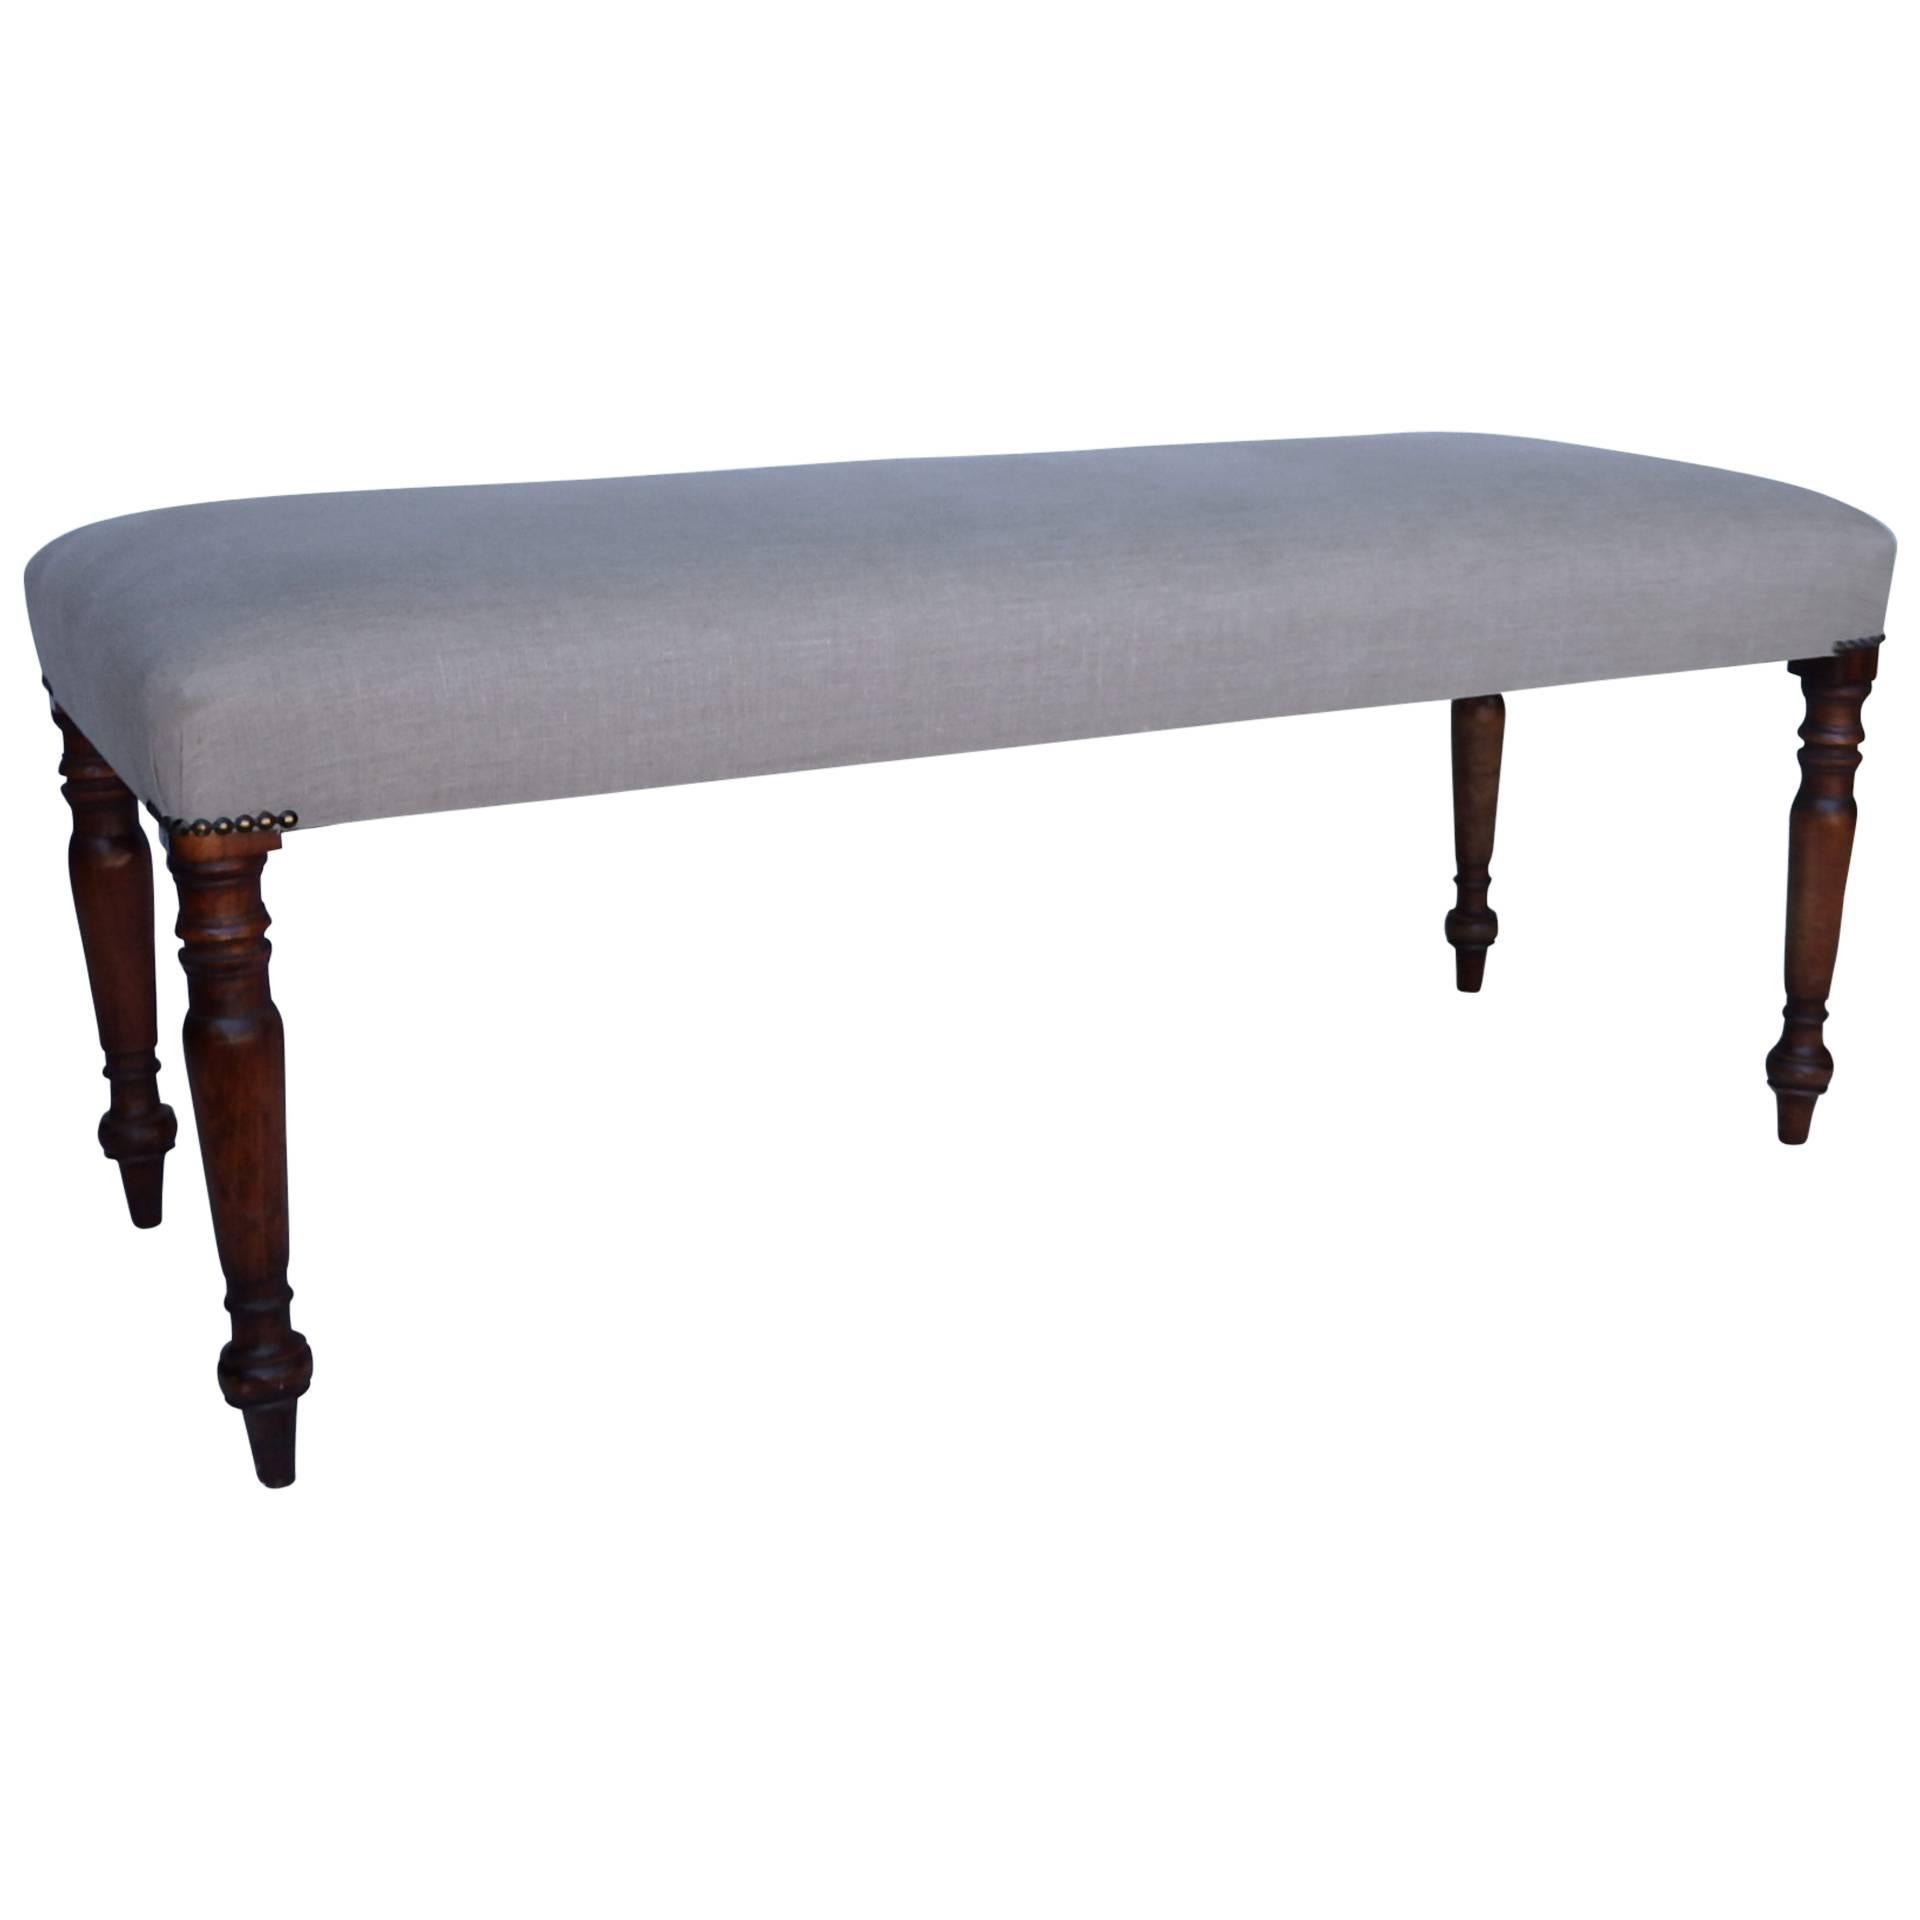 Upholstered Bench For Sale